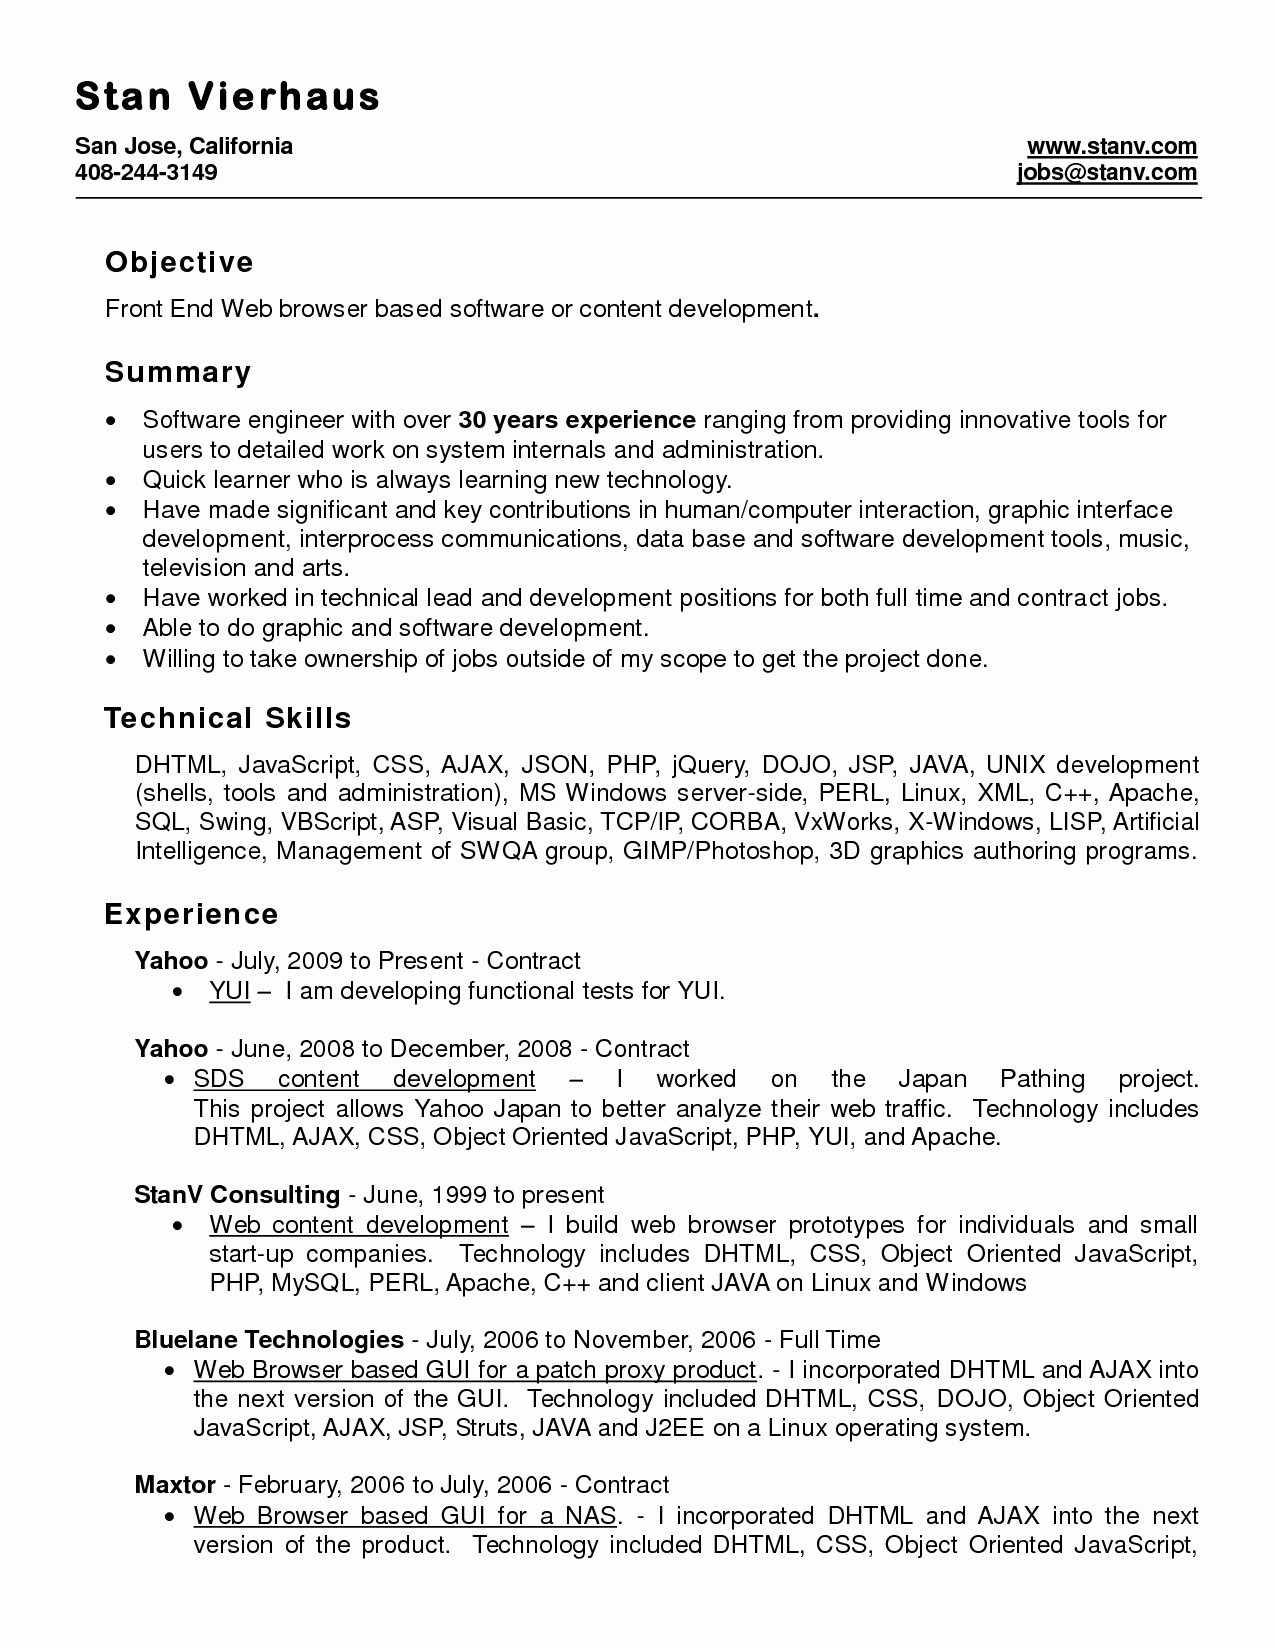 Ms Word Template for Resume Inspirational Resume Template Microsoft Word 2017